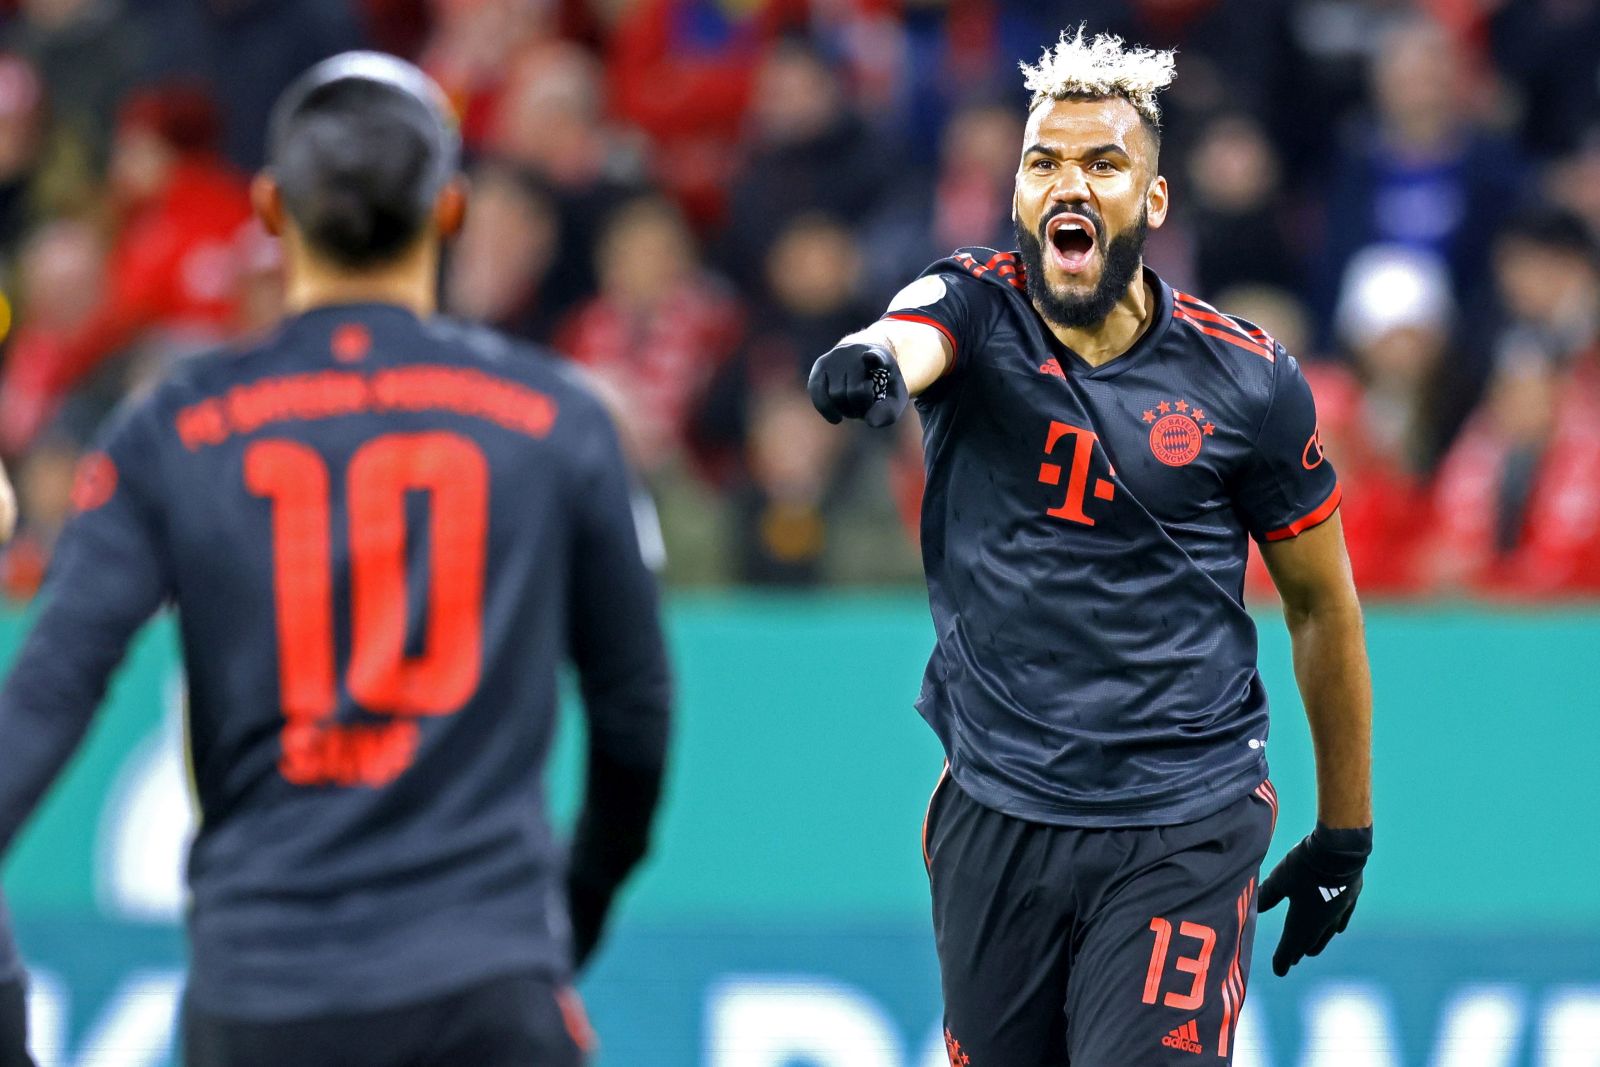 epa10443260 Munich's Eric Maxim Choupo-Moting celebrates after scoring the opening goal in the DFB Cup round of 16 soccer match between between 1. FSV Mainz 05 and Bayern Munich in Mainz, Germany, 01 February 2023.  EPA/RONALD WITTEK